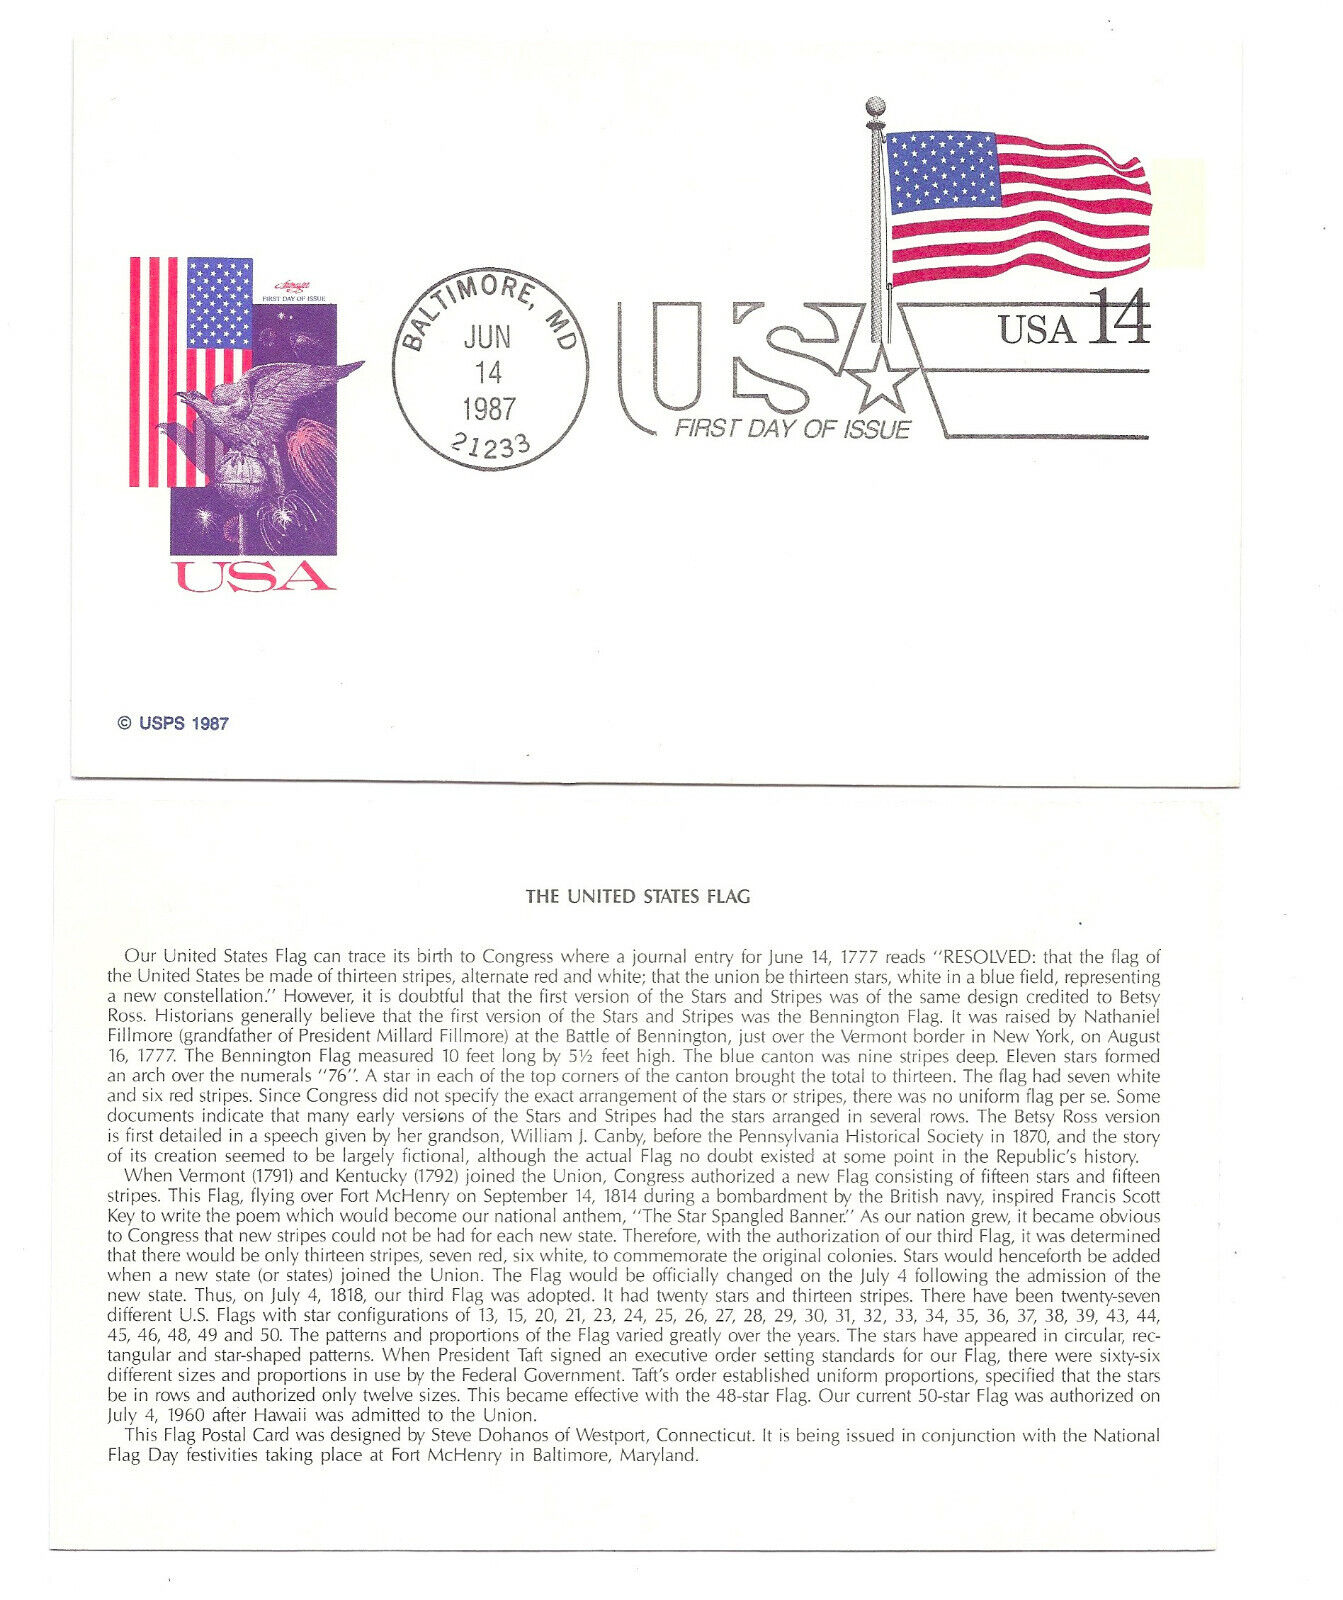 UX117 Finally popular brand security 14c Flag FDC Artmaster